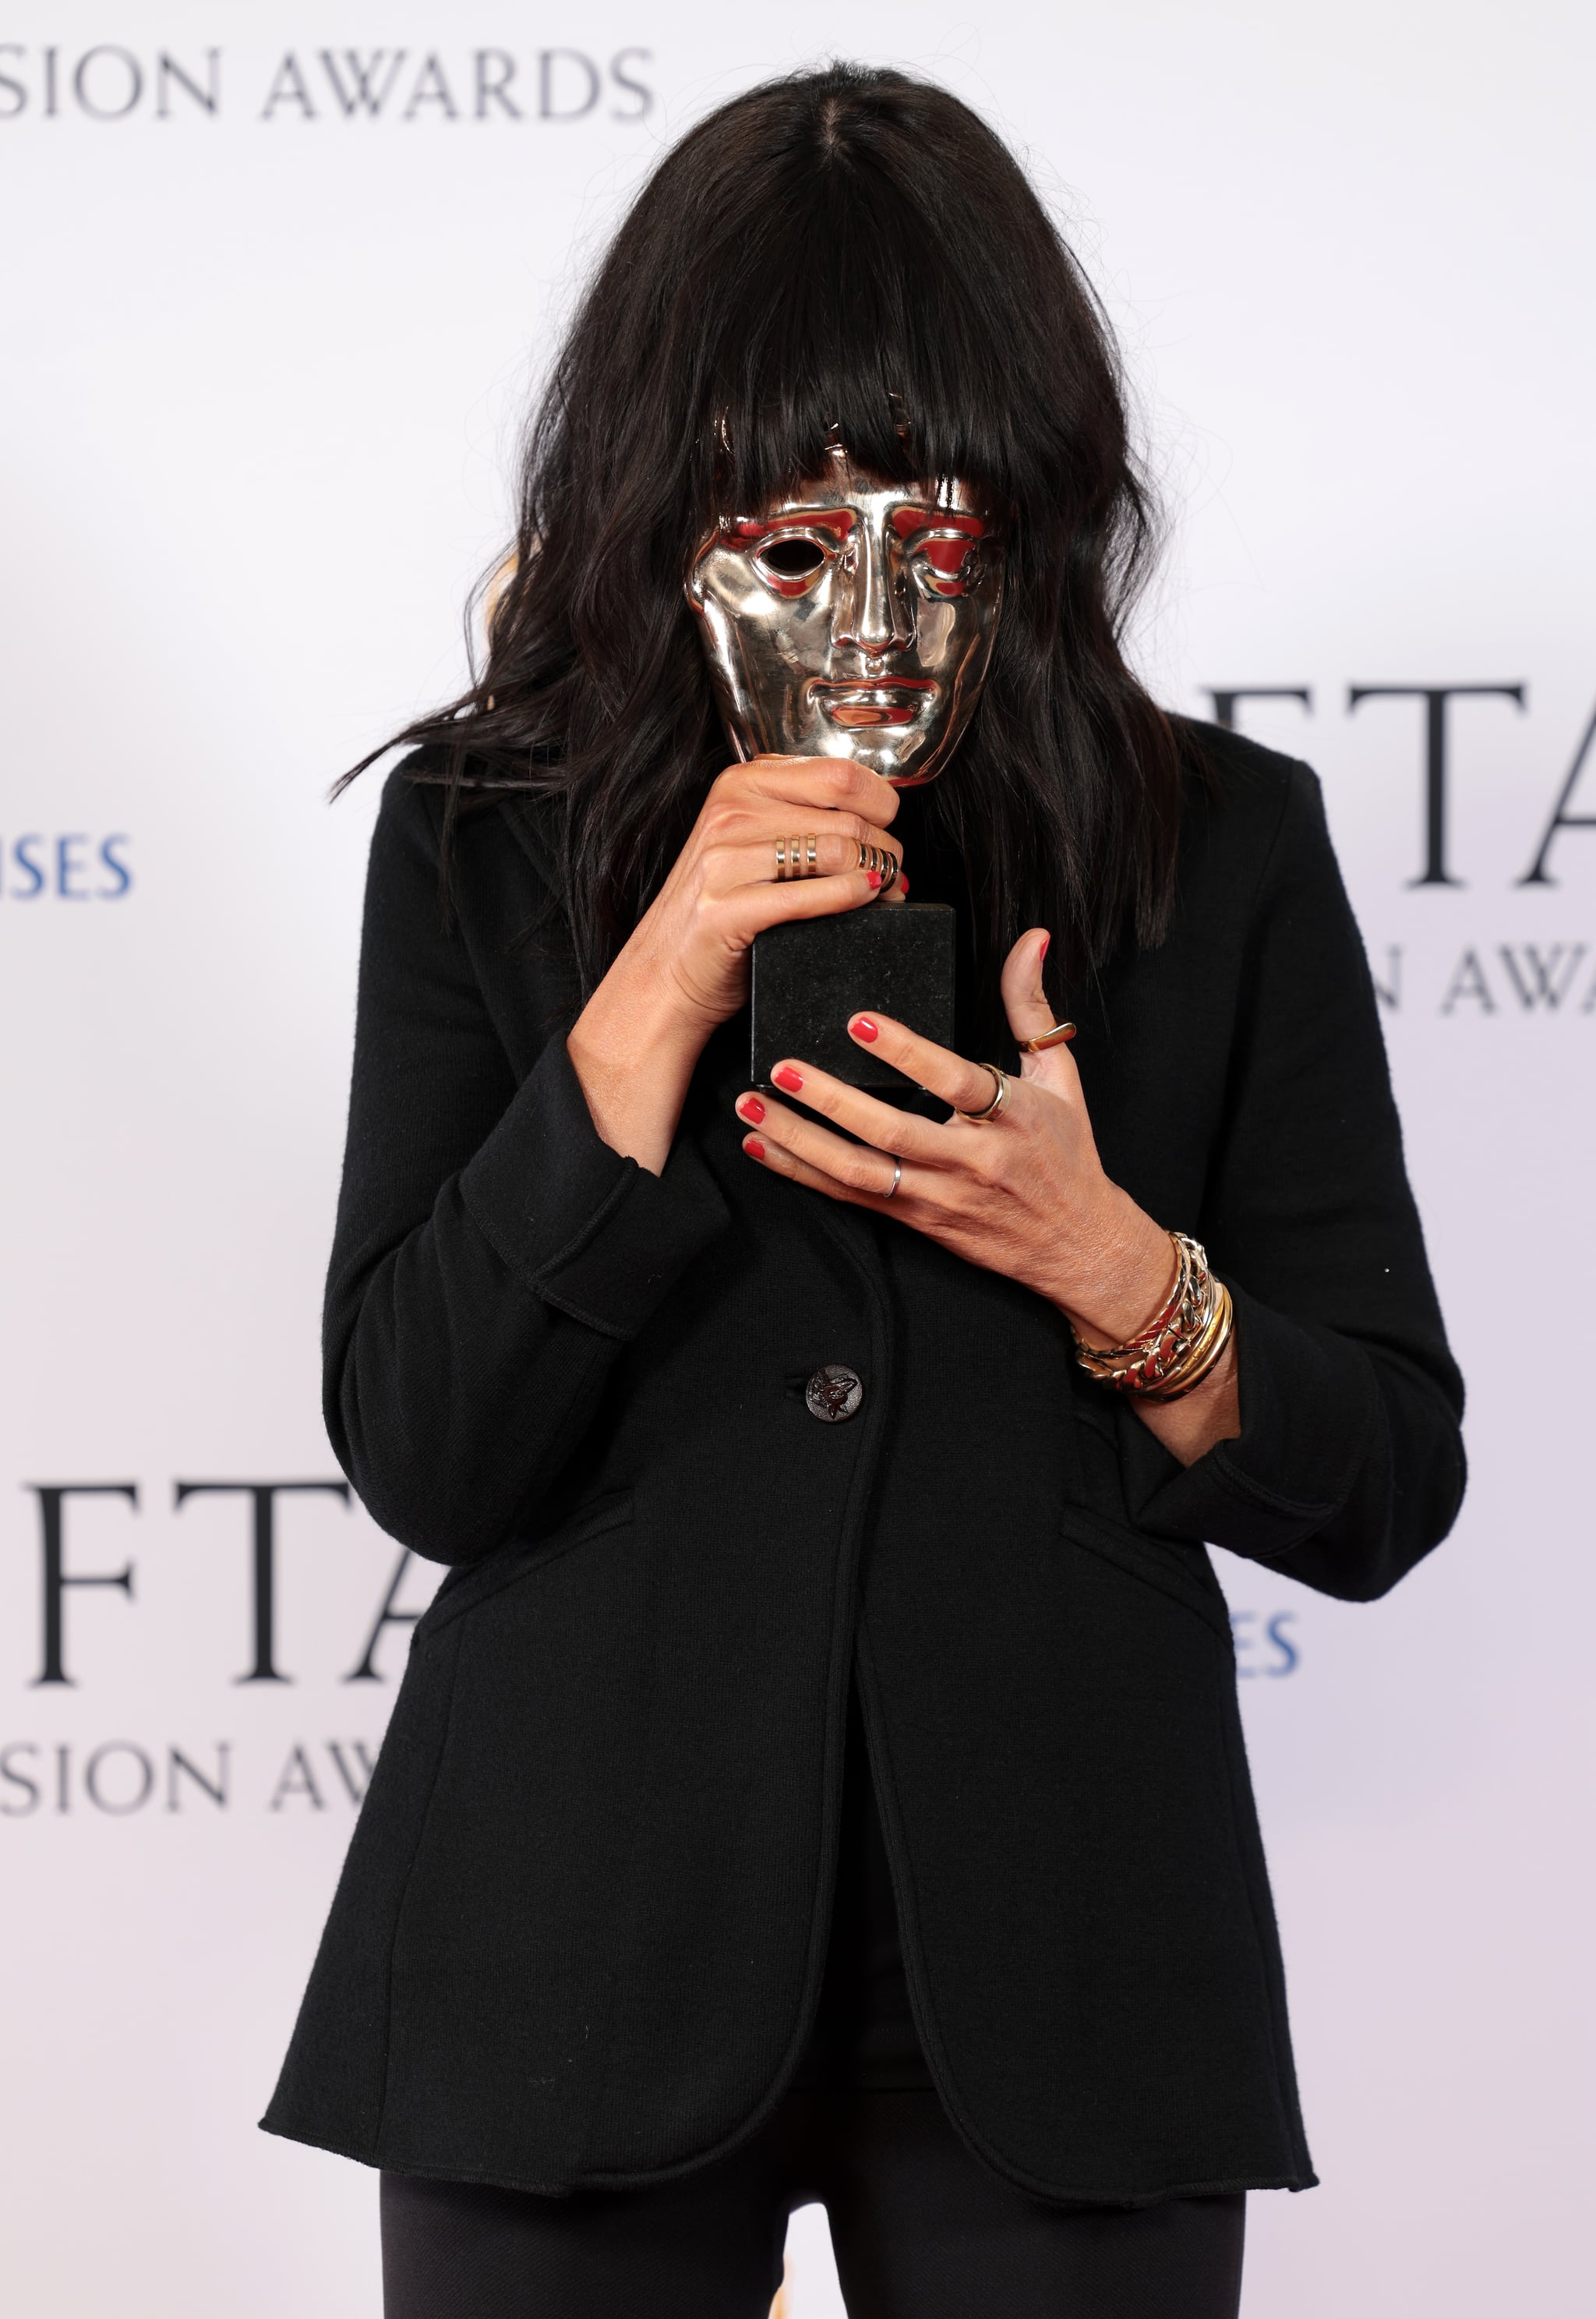 LONDON, ENGLAND - MAY 14: Claudia Winkleman with the award for Entertainment Performance  for 'The Traitors' during the 2023 BAFTA Television Awards with P&O Cruises at The Royal Festival Hall on May 14, 2023 in London, England. (Photo by Shane Anthony Sinclair/BAFTA/Getty Images for BAFTA)